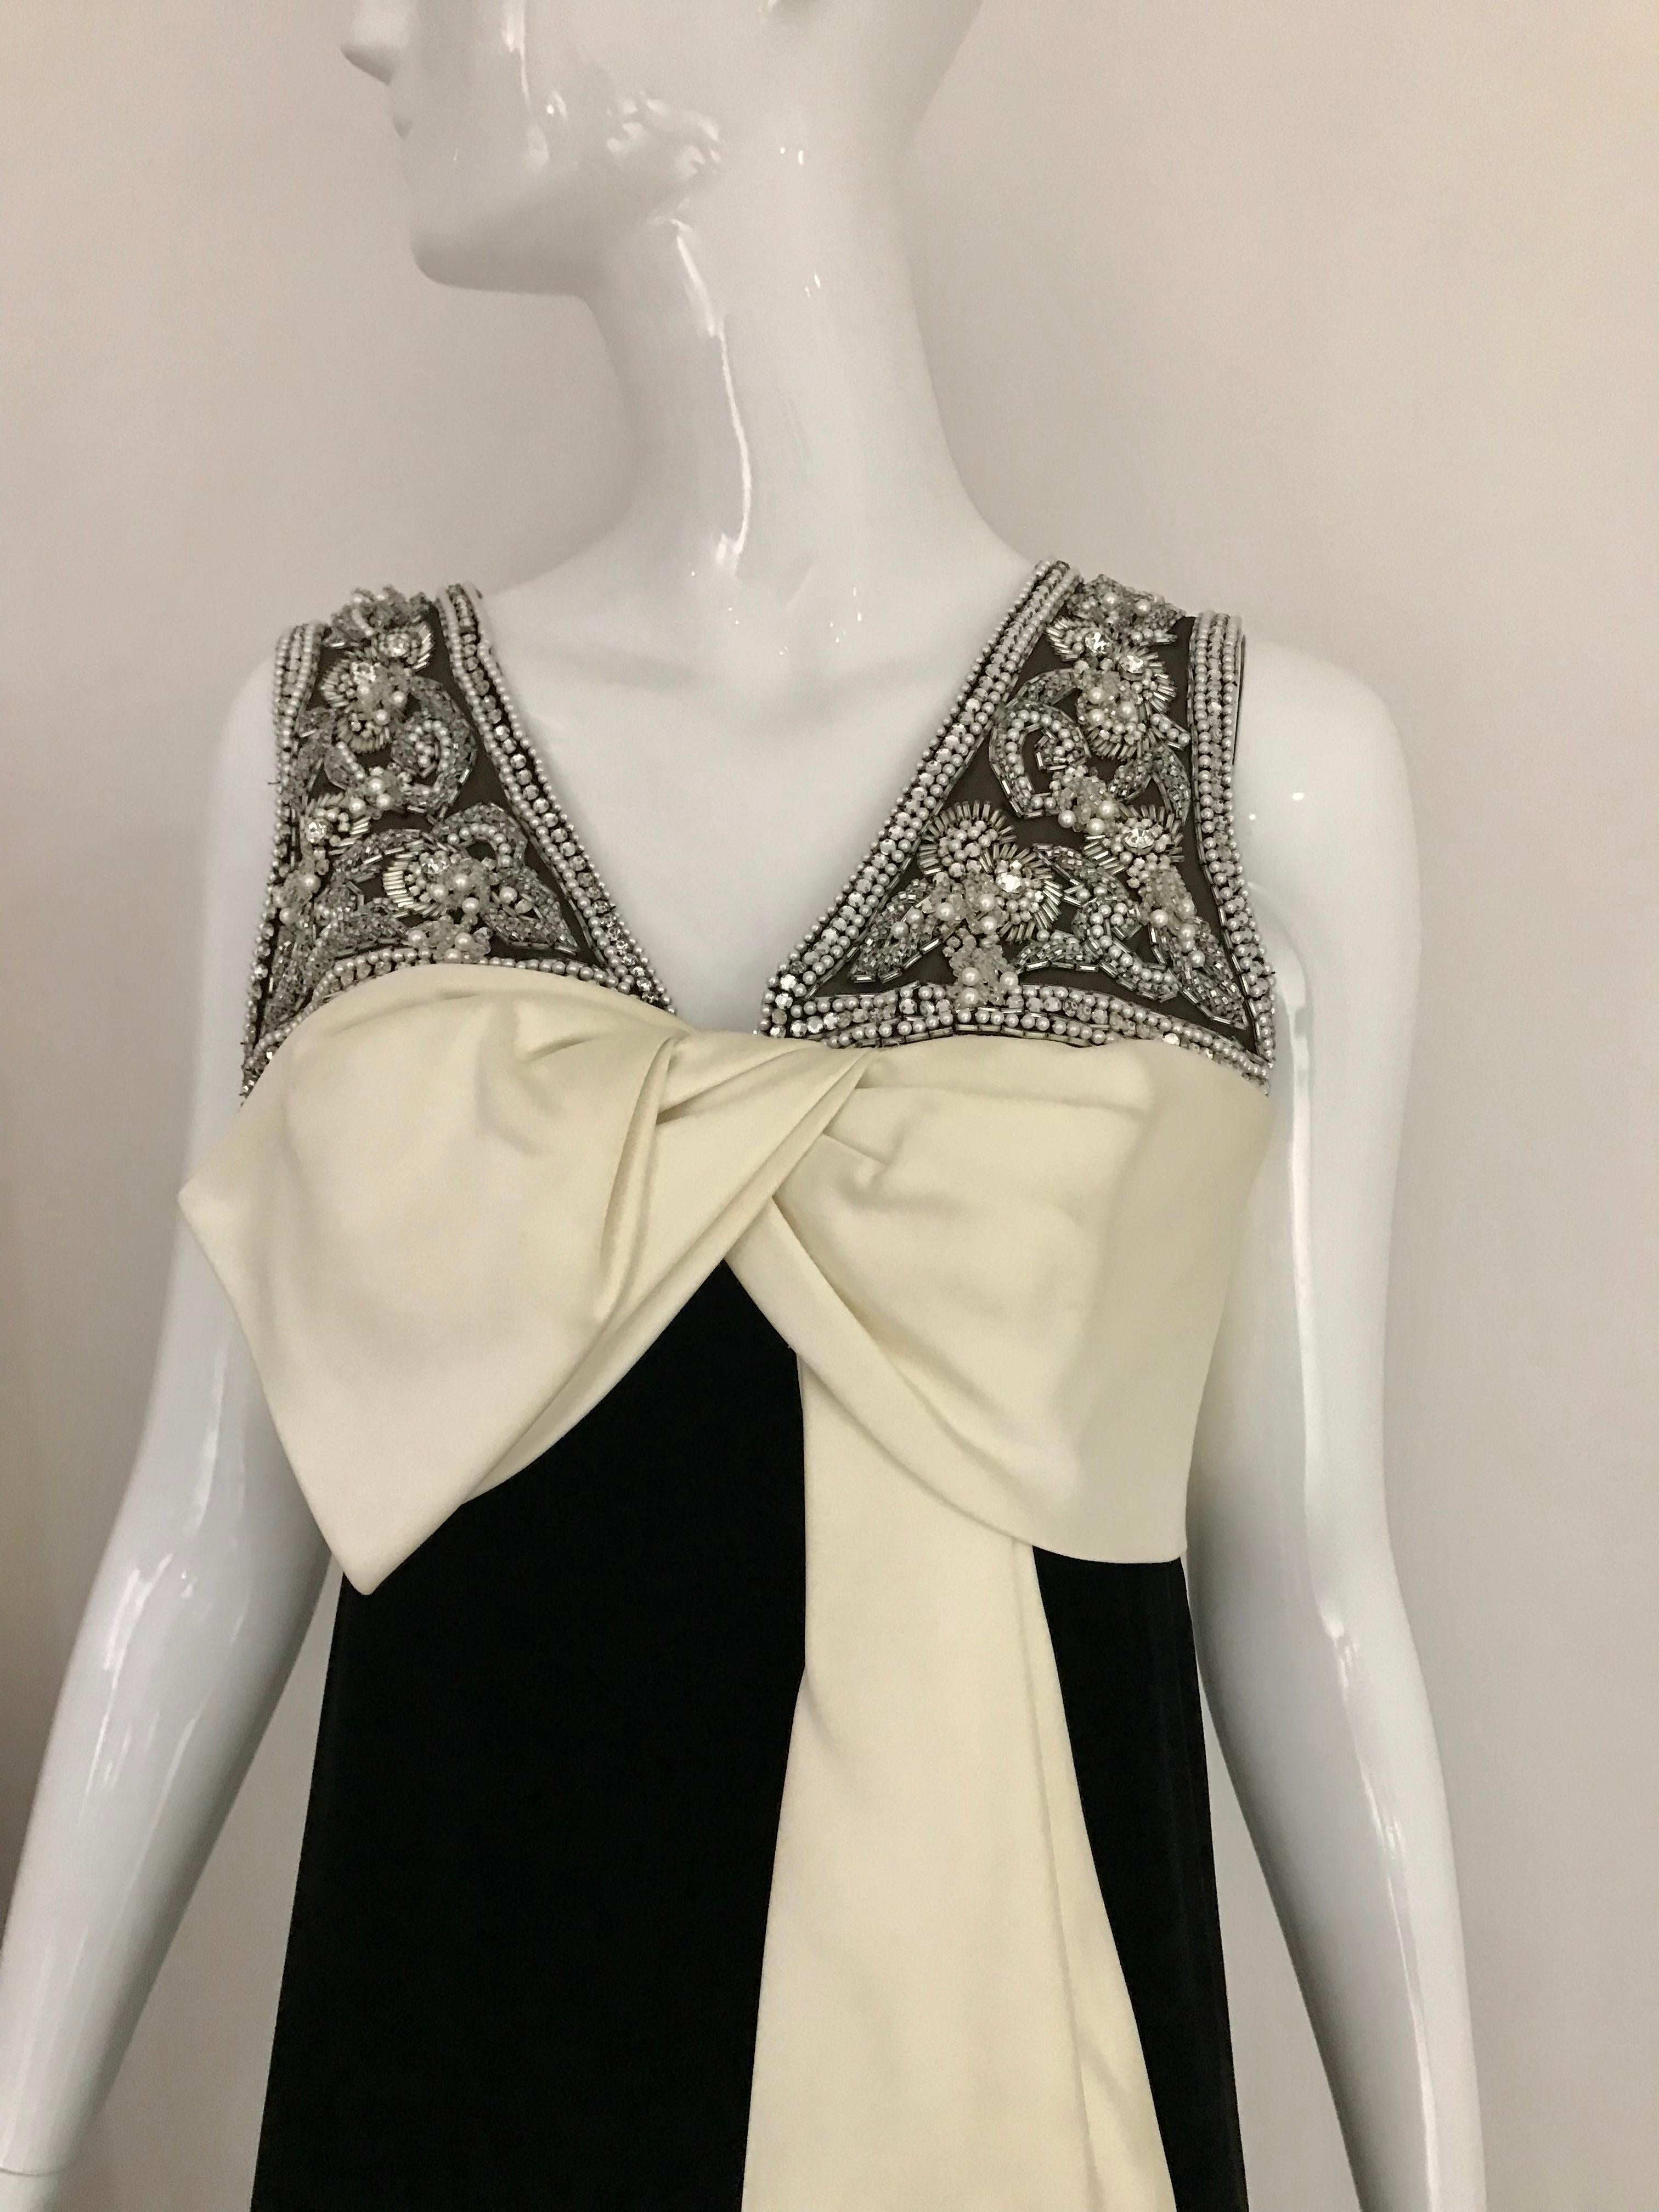 Elegant 1960s Black Velvet sleeveless gown with creme silk bow and embellished with clear bugle beads. 
Size : 6
** tiny tear on the armpit area ( see image) 
Dress has been freshly dry cleaned.